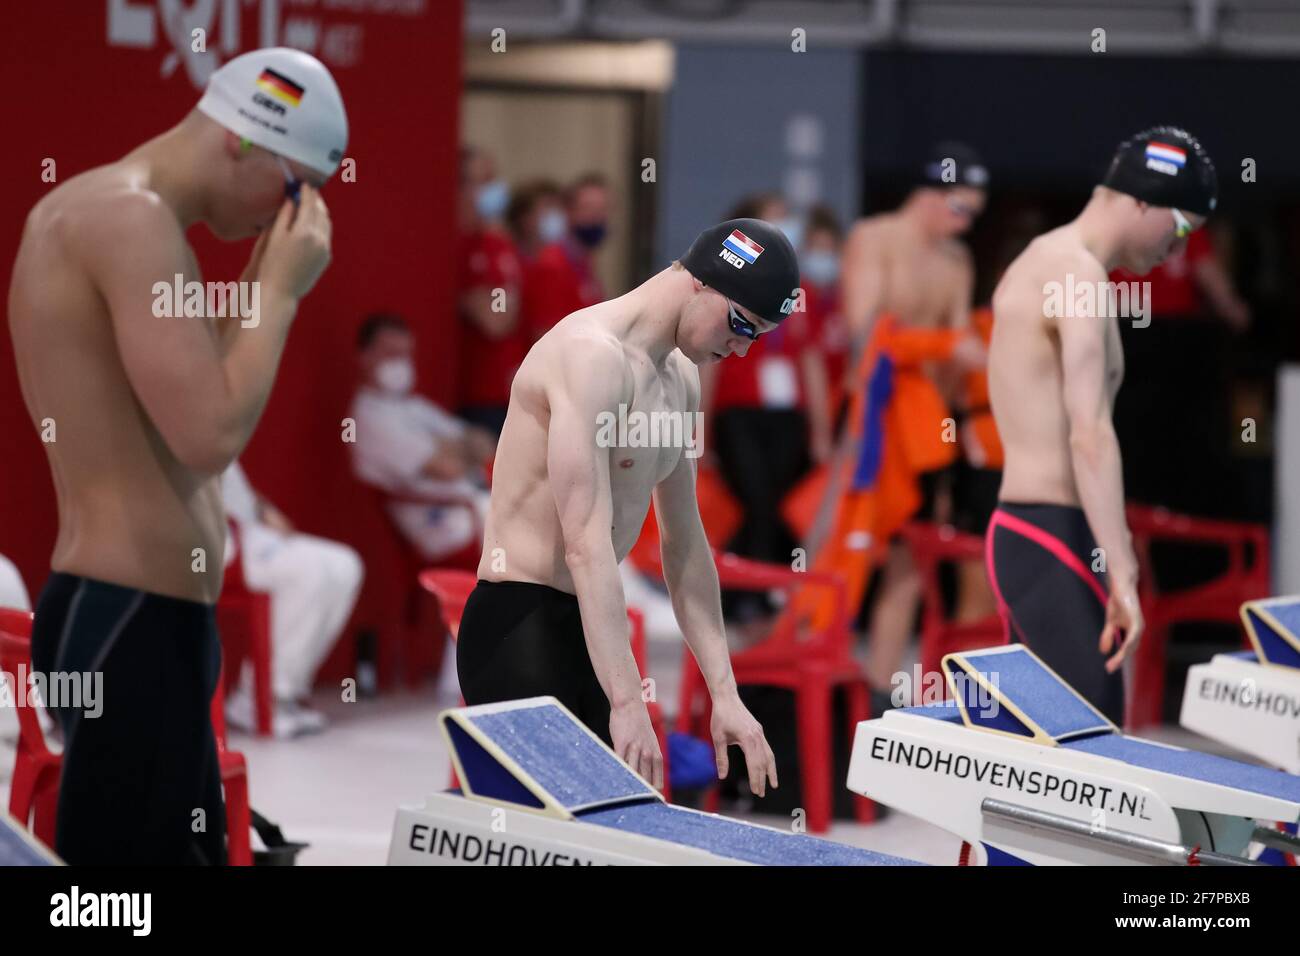 EINDHOVEN, NETHERLANDS - APRIL 9: Silas Beth of Germany, Arjan Knipping of the Netherlands and Thomas Jansen of the Netherlands competing in the mens Stock Photo